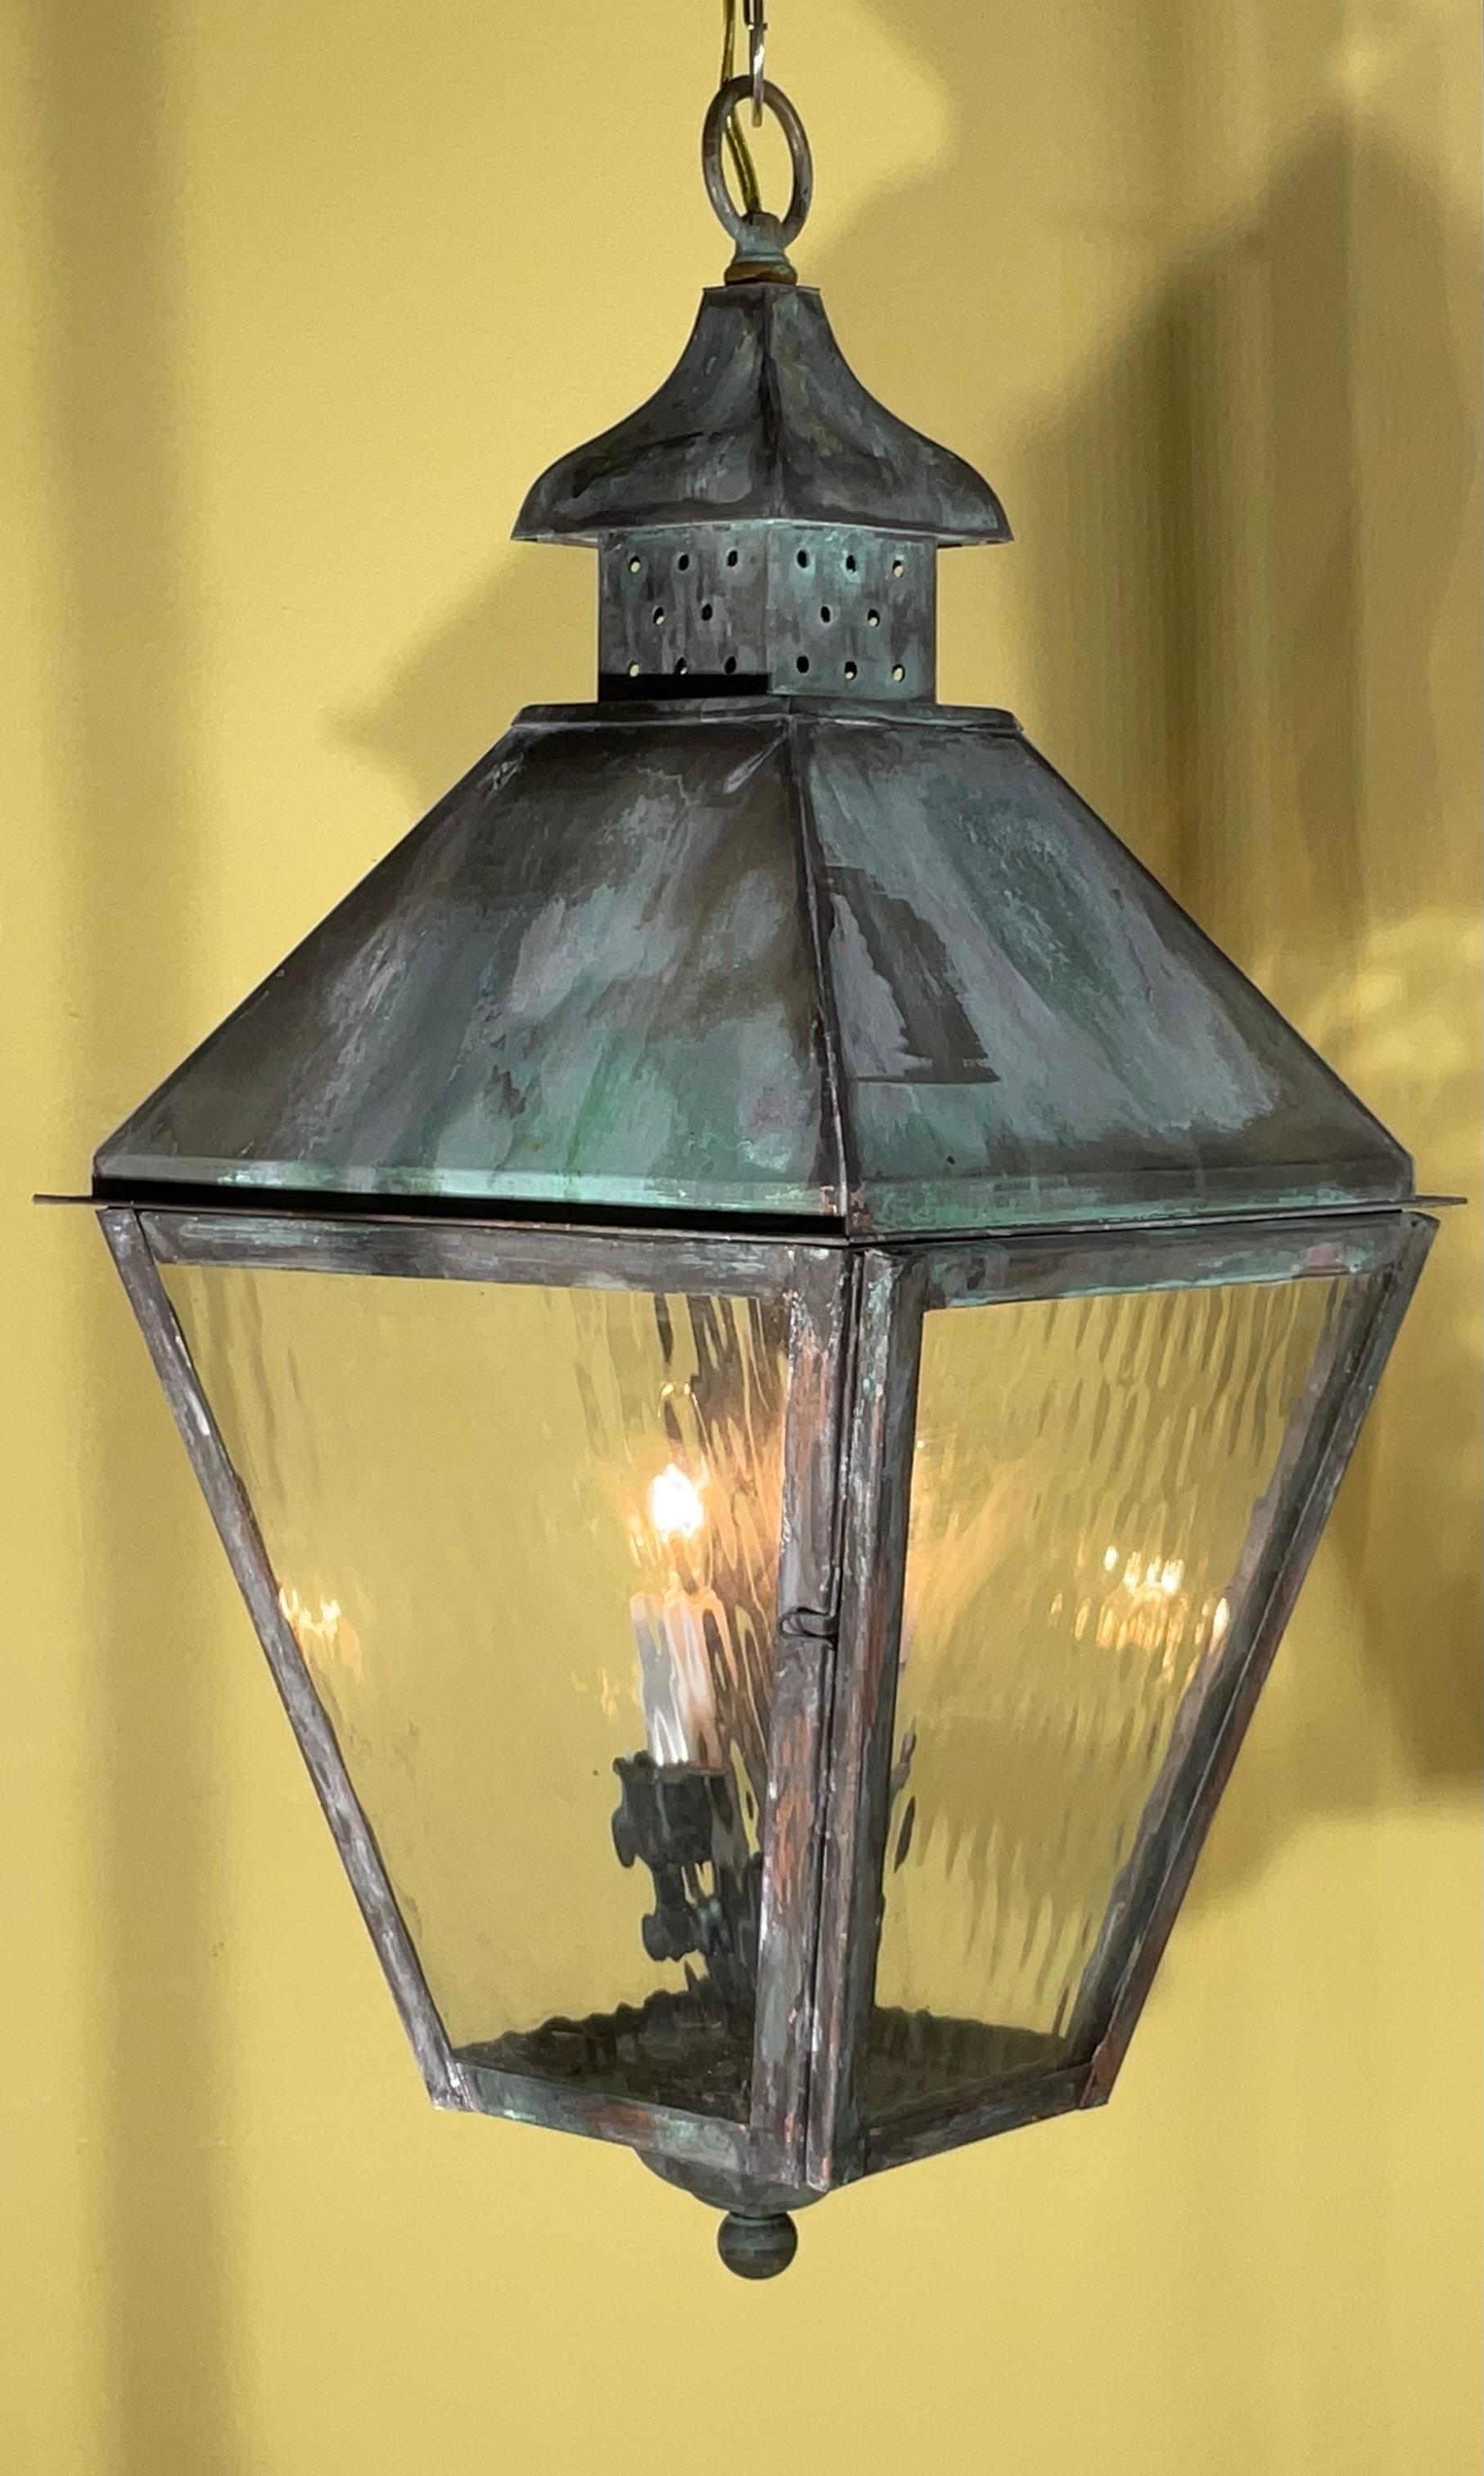 Hand-Crafted 4-Sides Hanging Copper Lantern For Sale